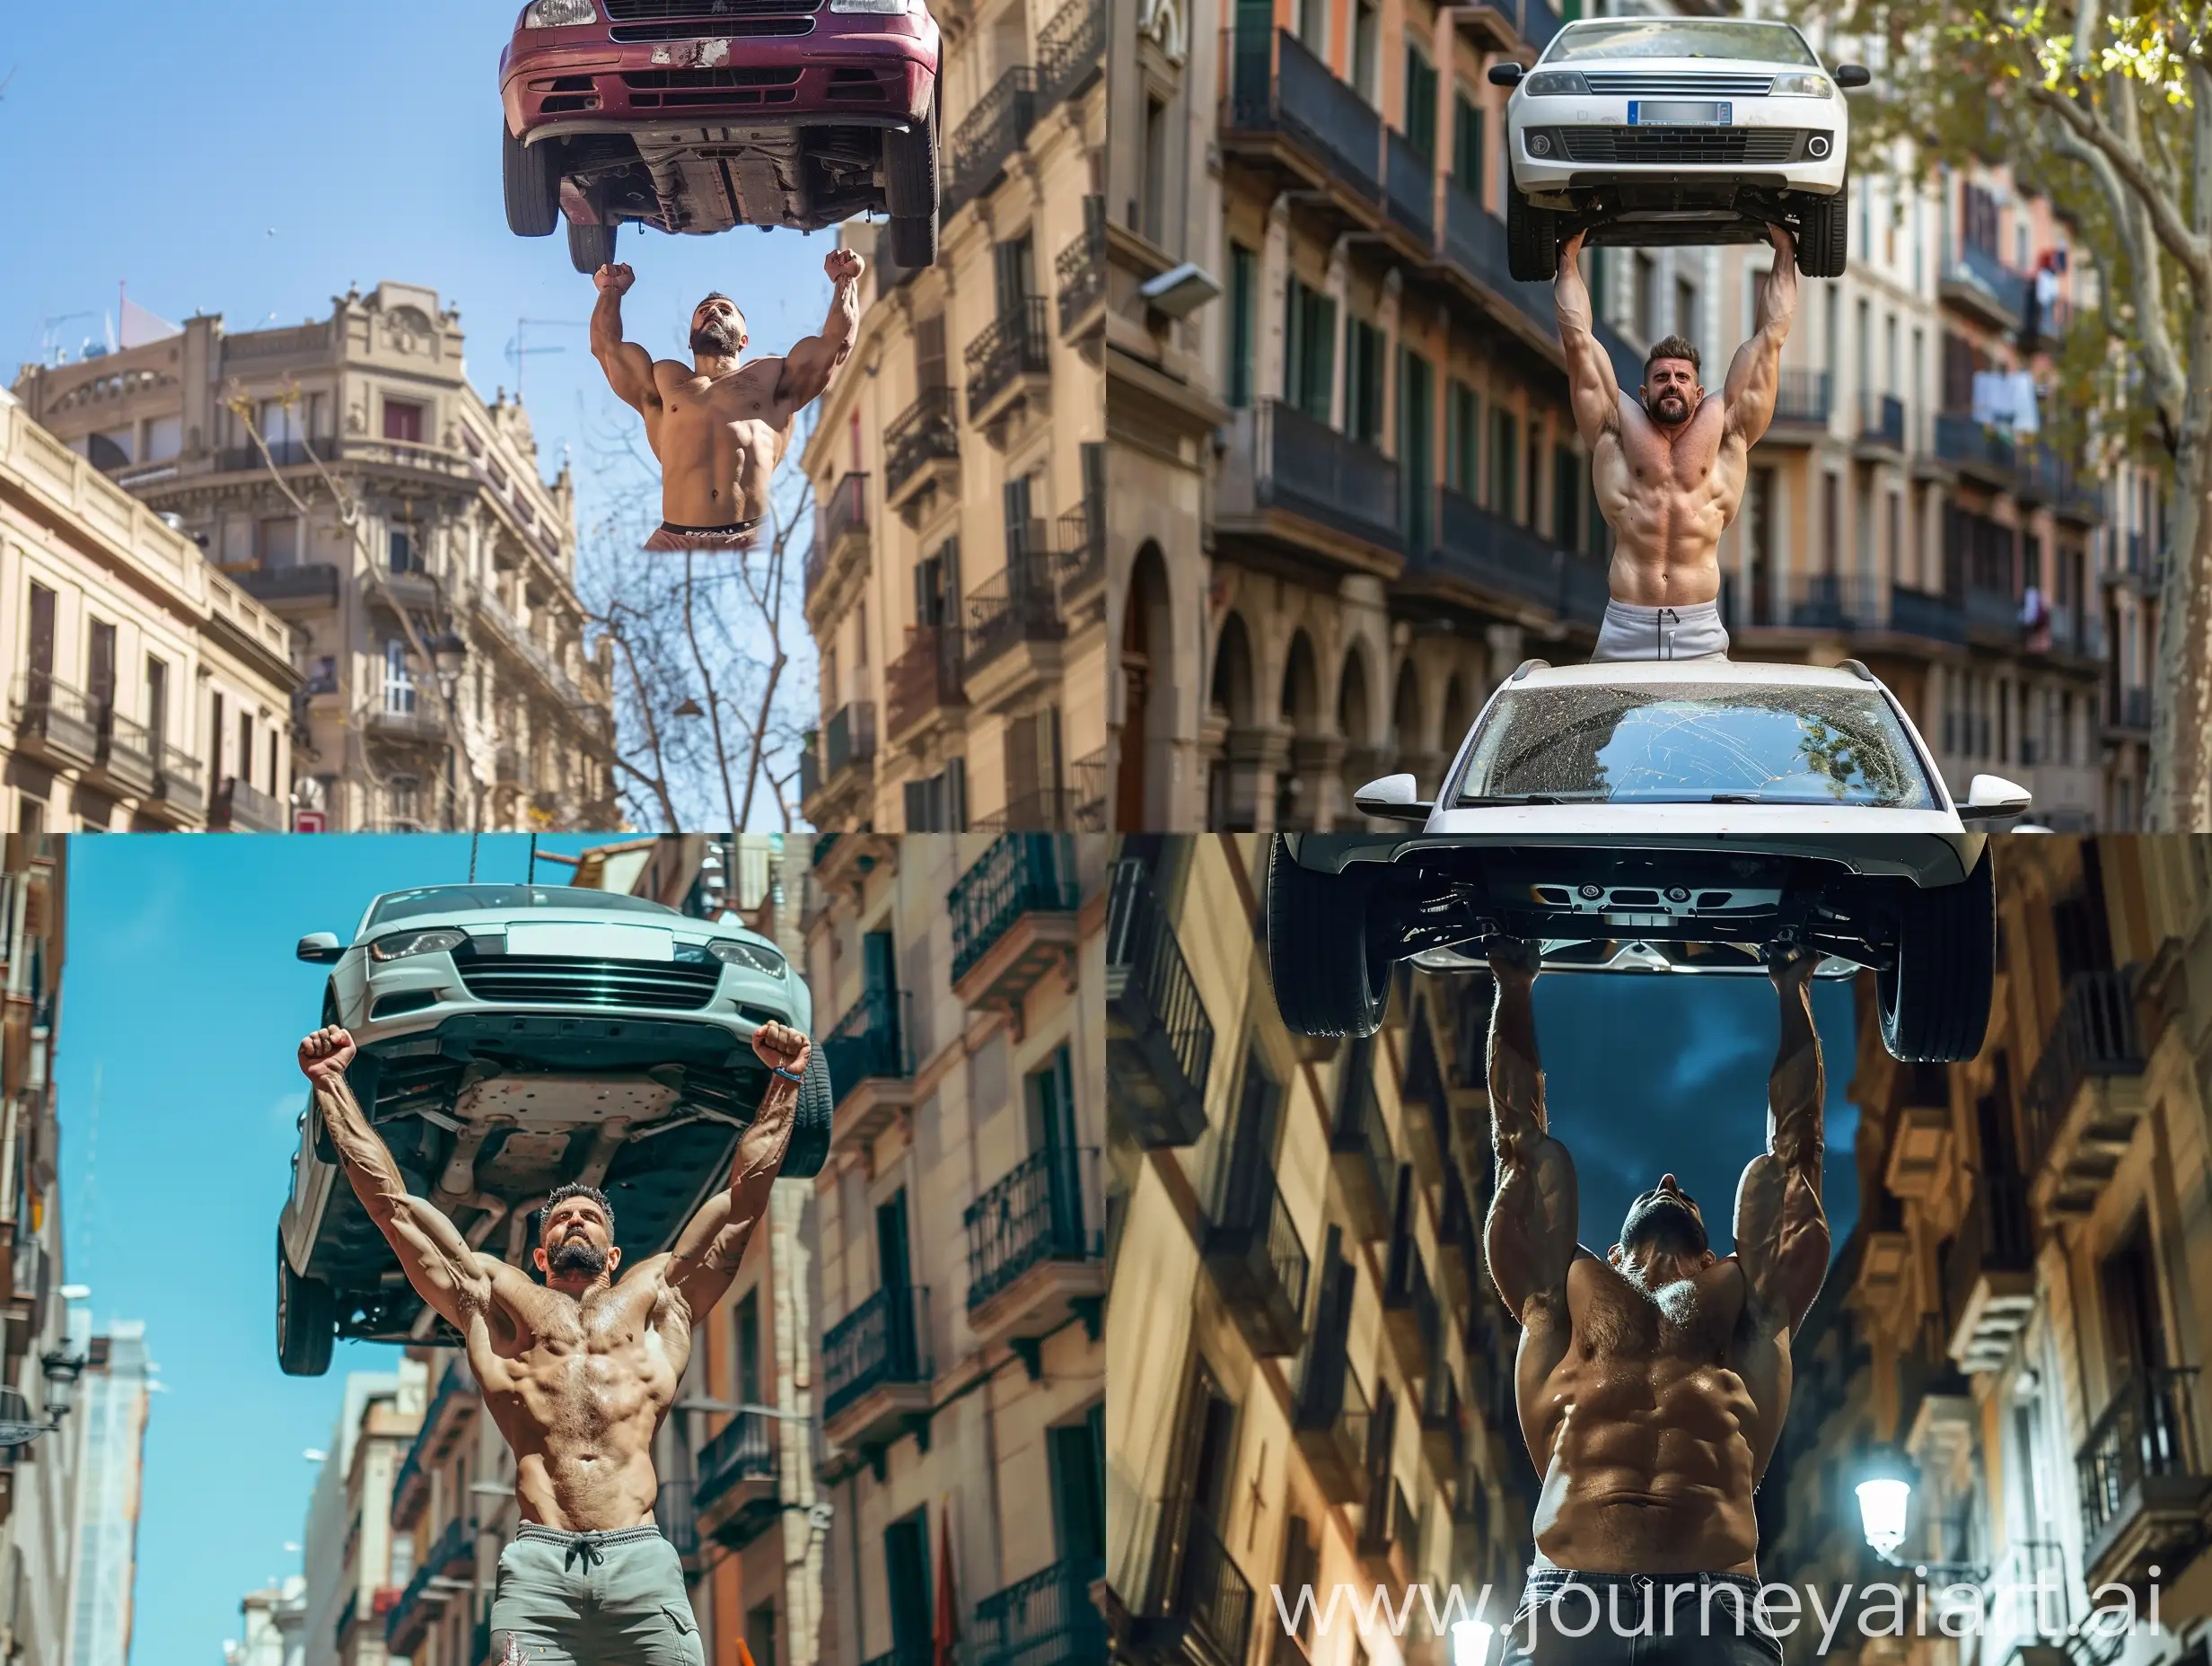 A big muscular strongman is lifting up a car, in Barcelona